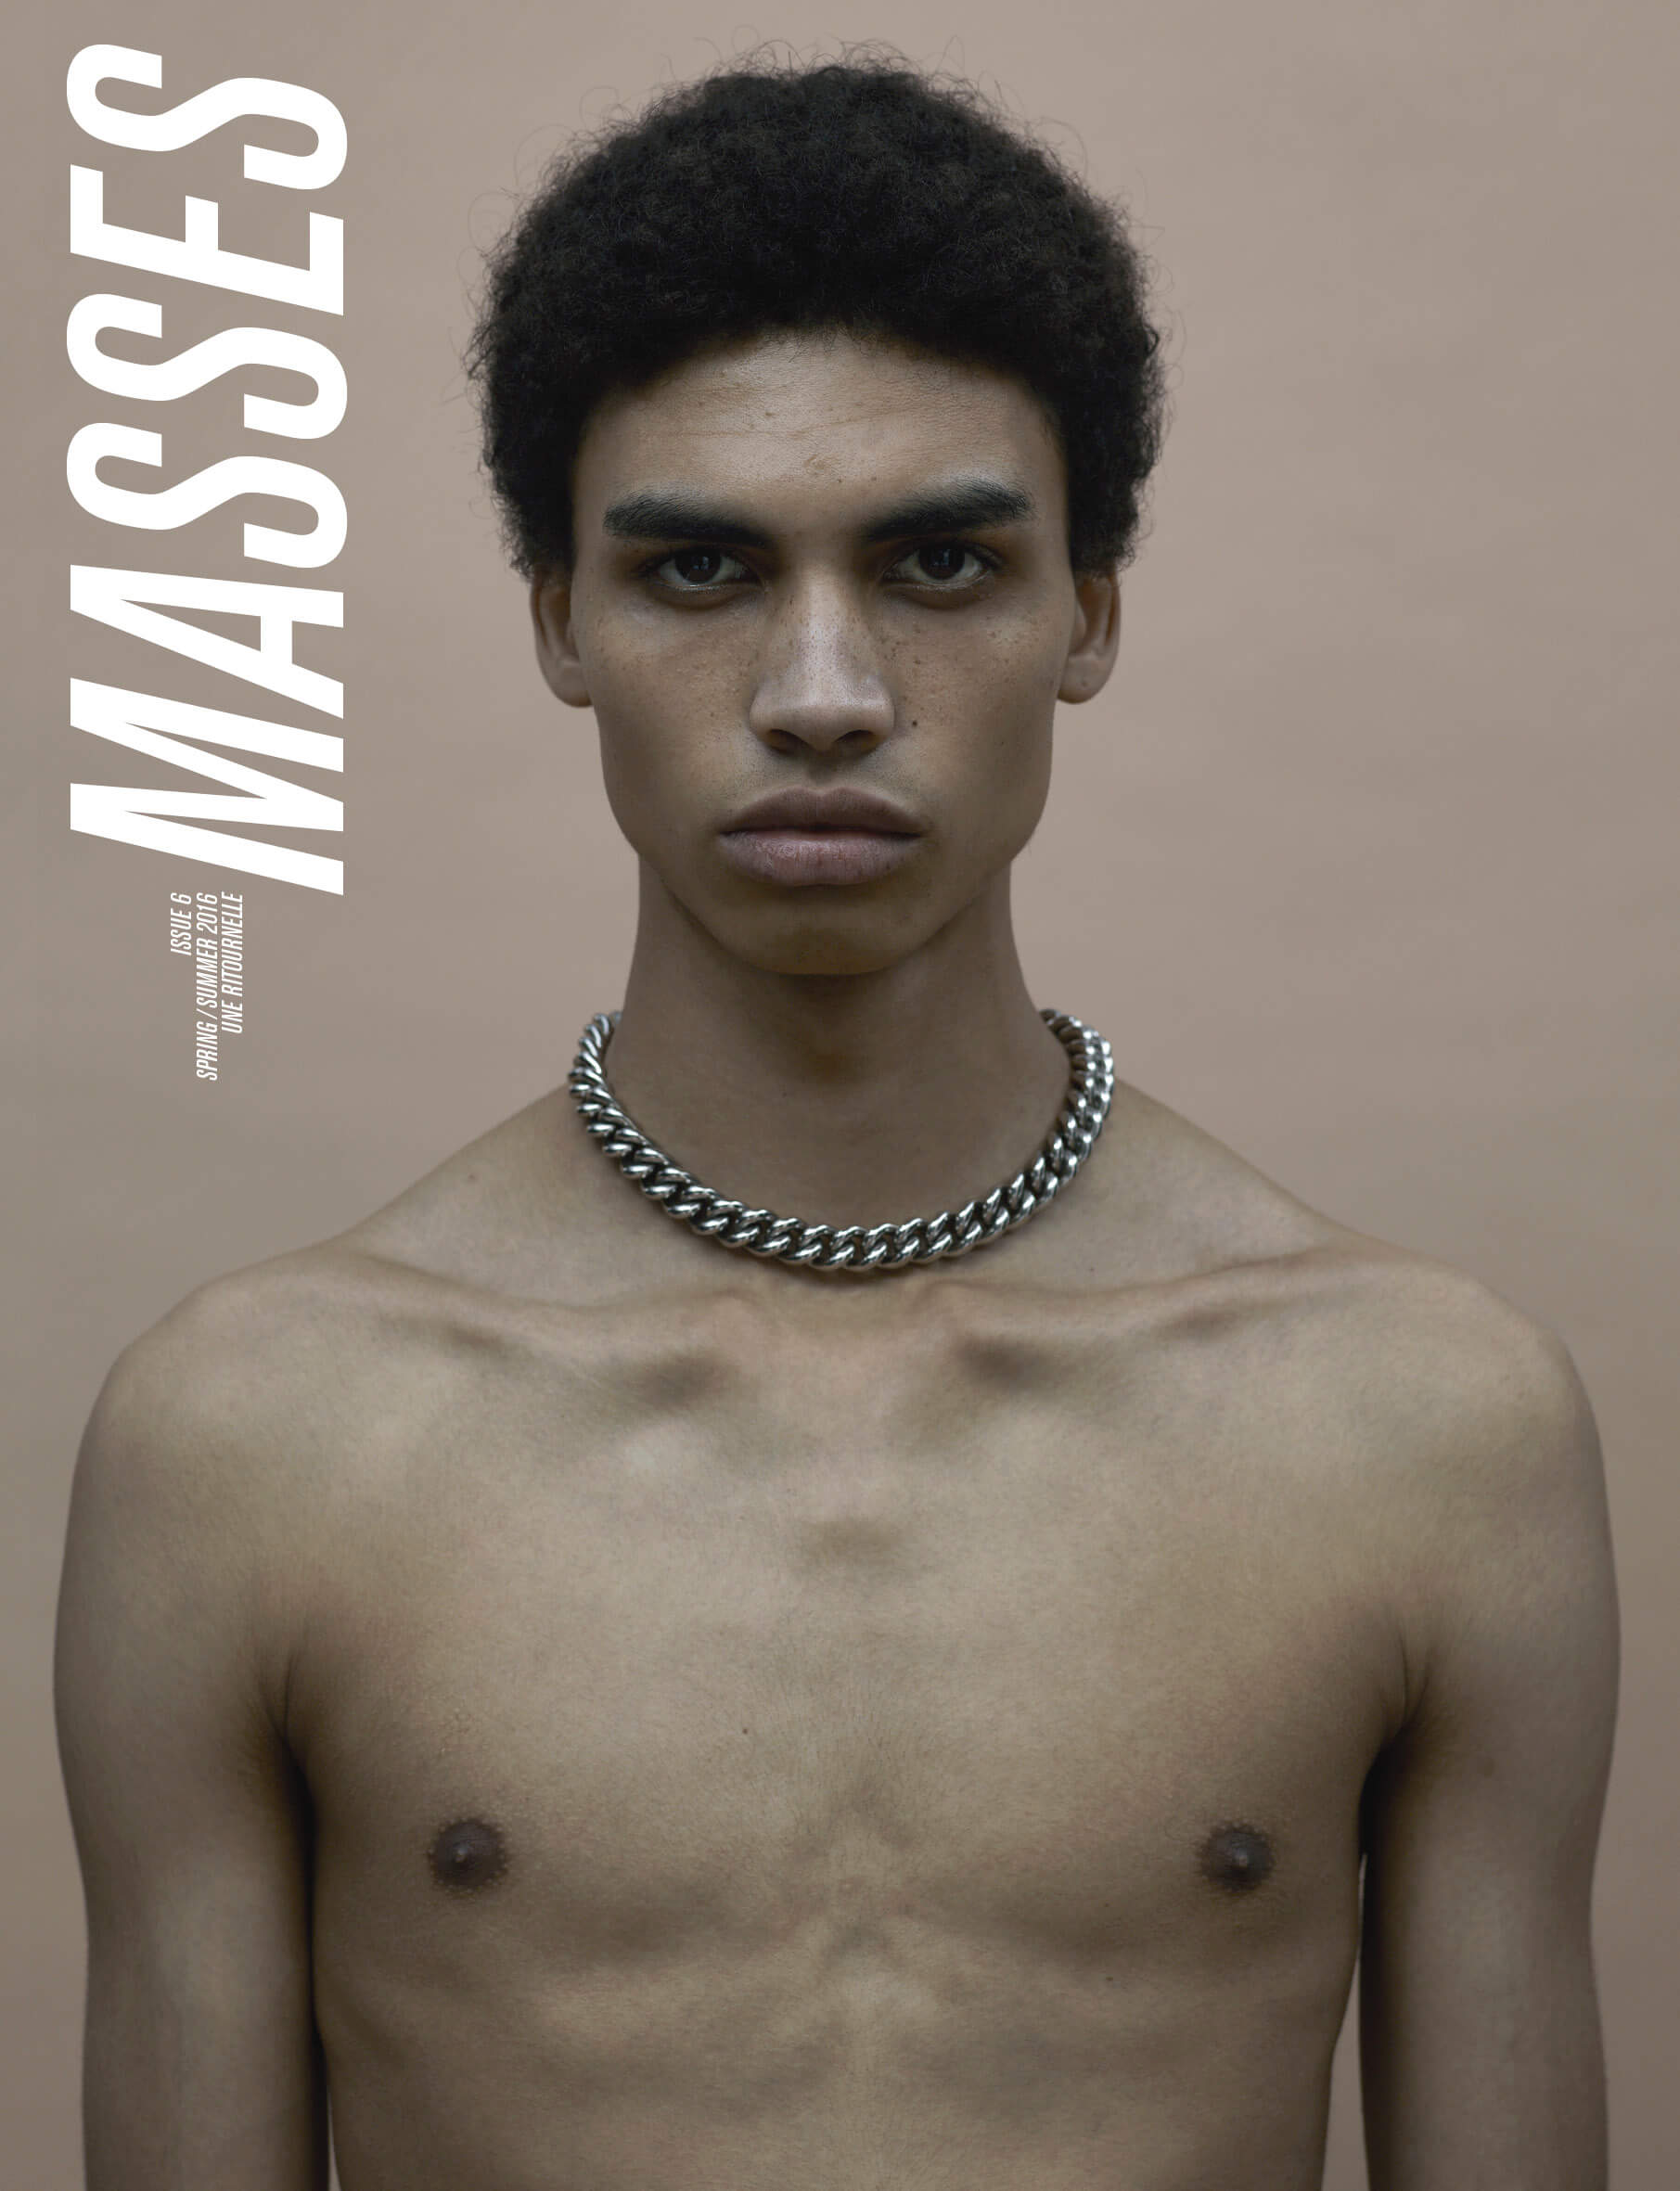 MASSES Magazine Issue No. 6 – Cover photographed by Jackie Nickerson and Kim Jones with Sol Goss at SUPA Model Management wearing Louis Vuitton